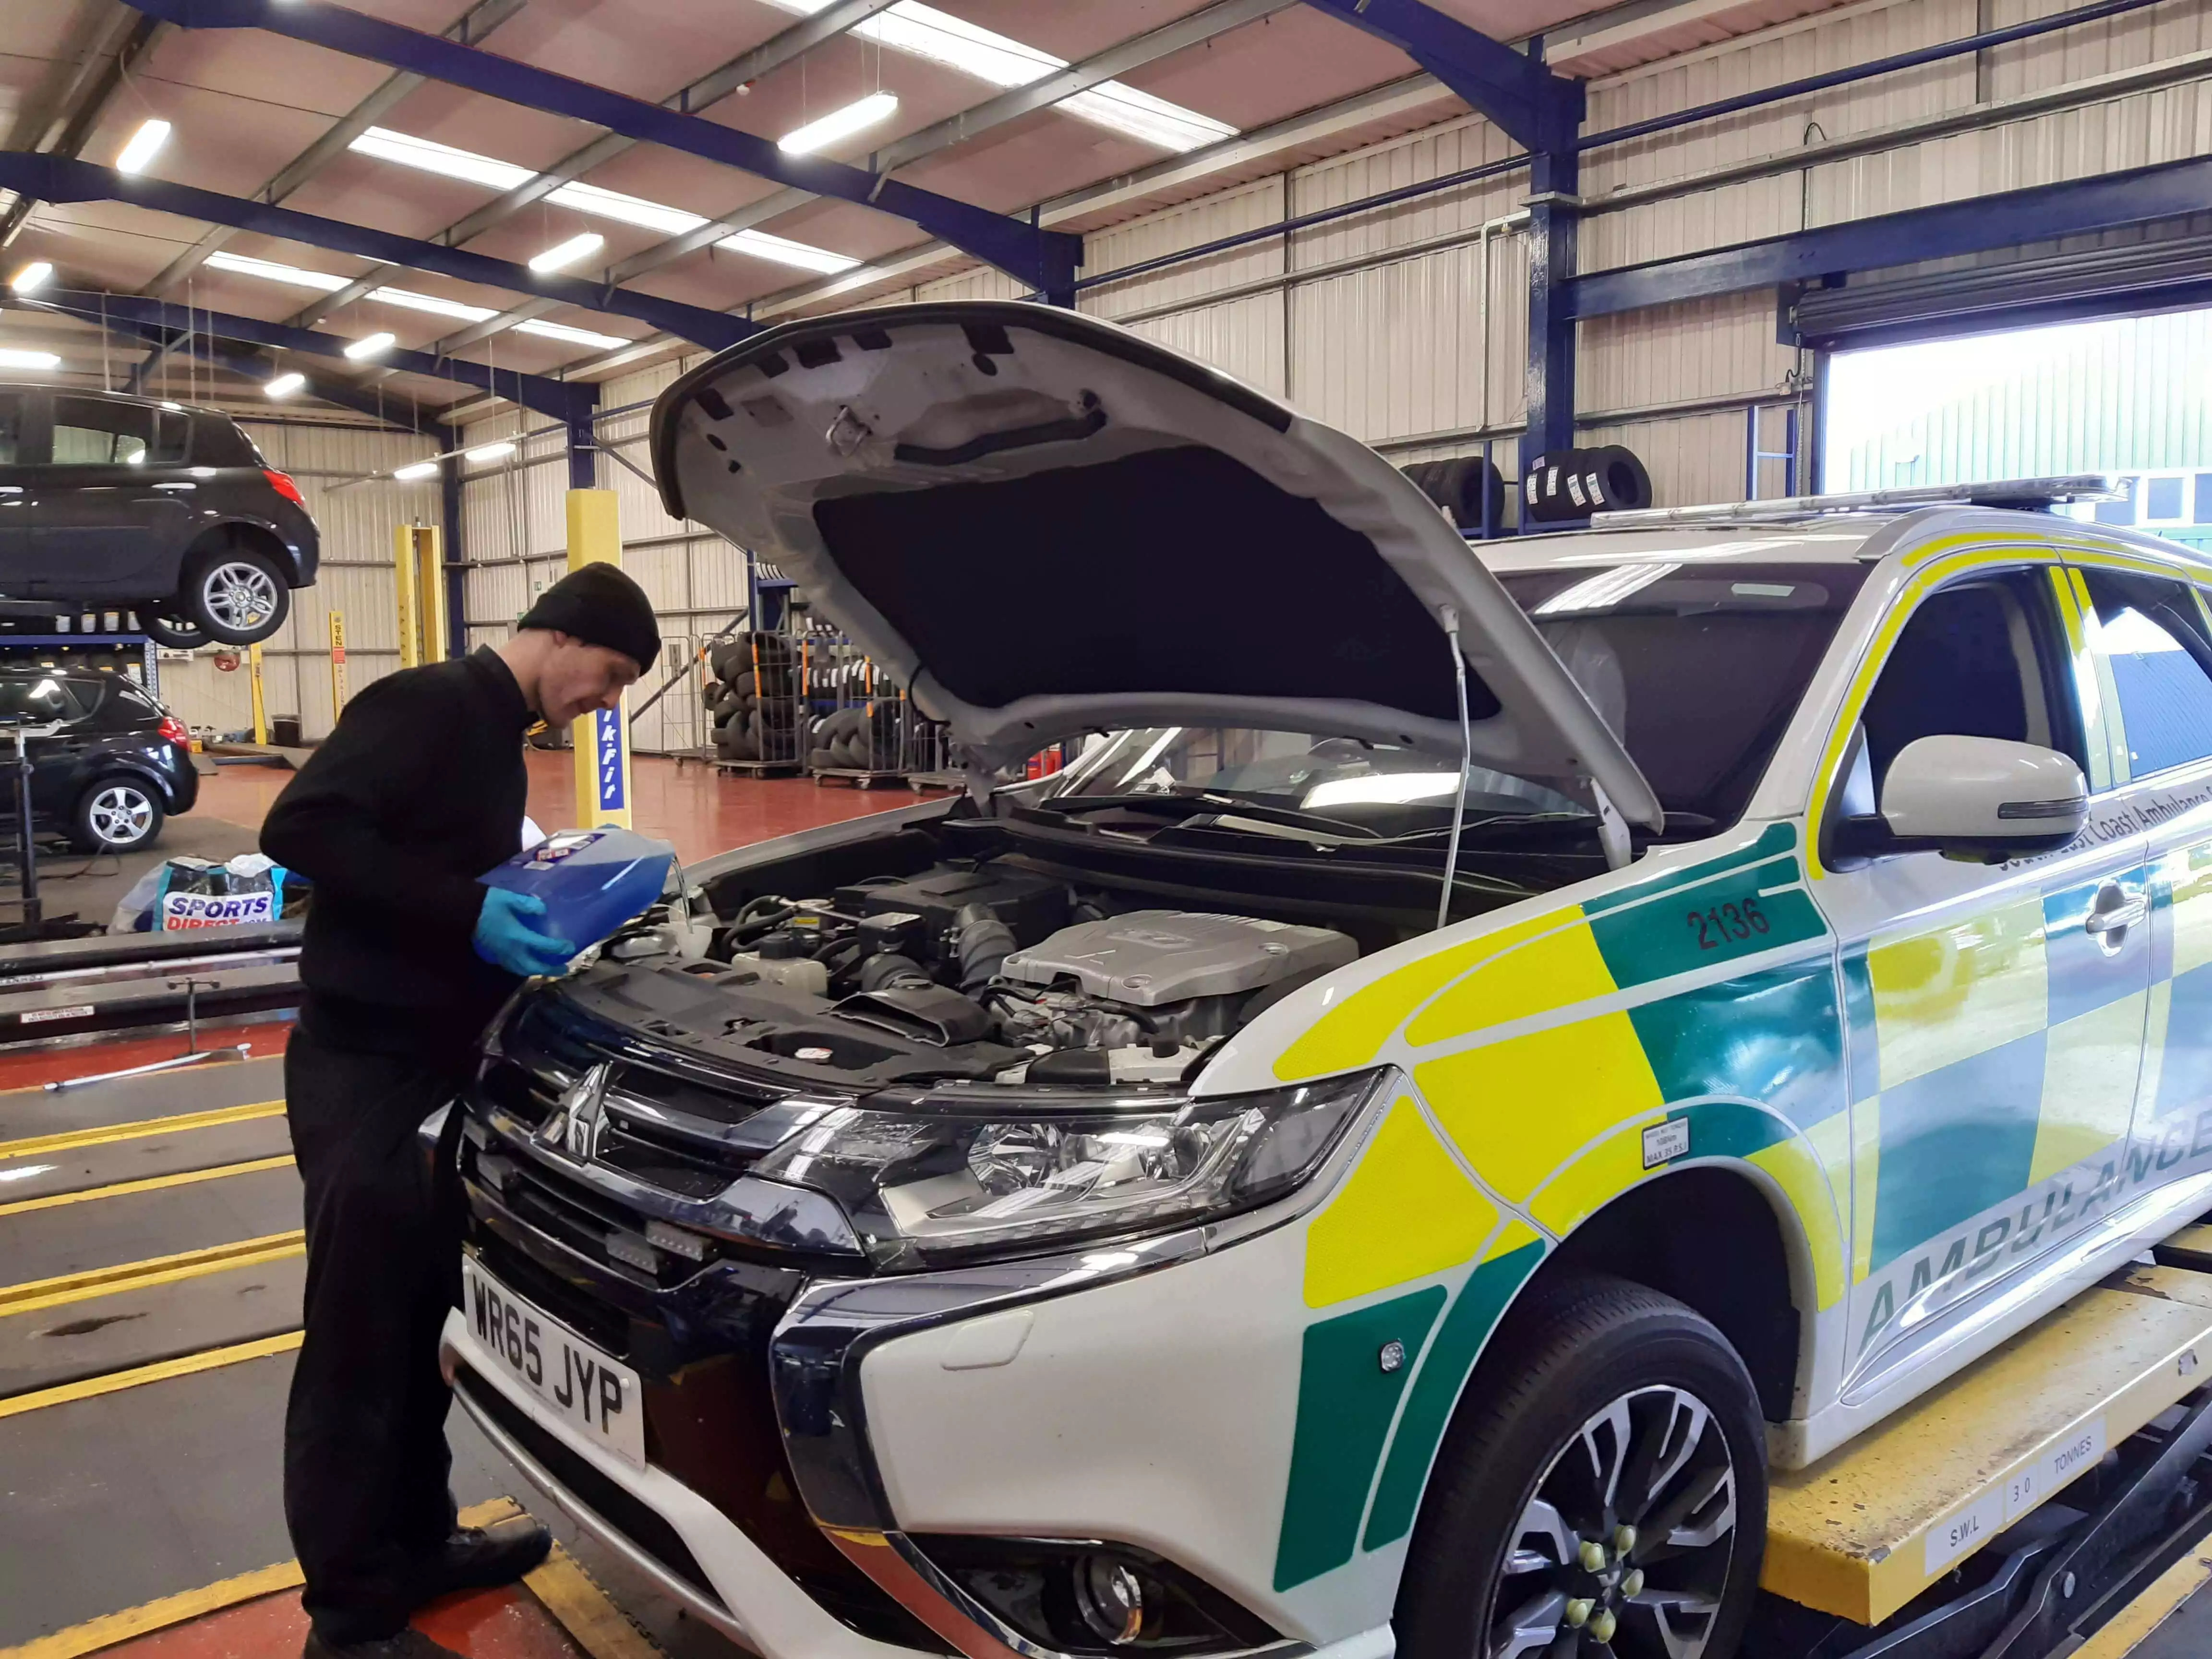 Kwik Fit employee pouring washer fluid into an Ambulance.